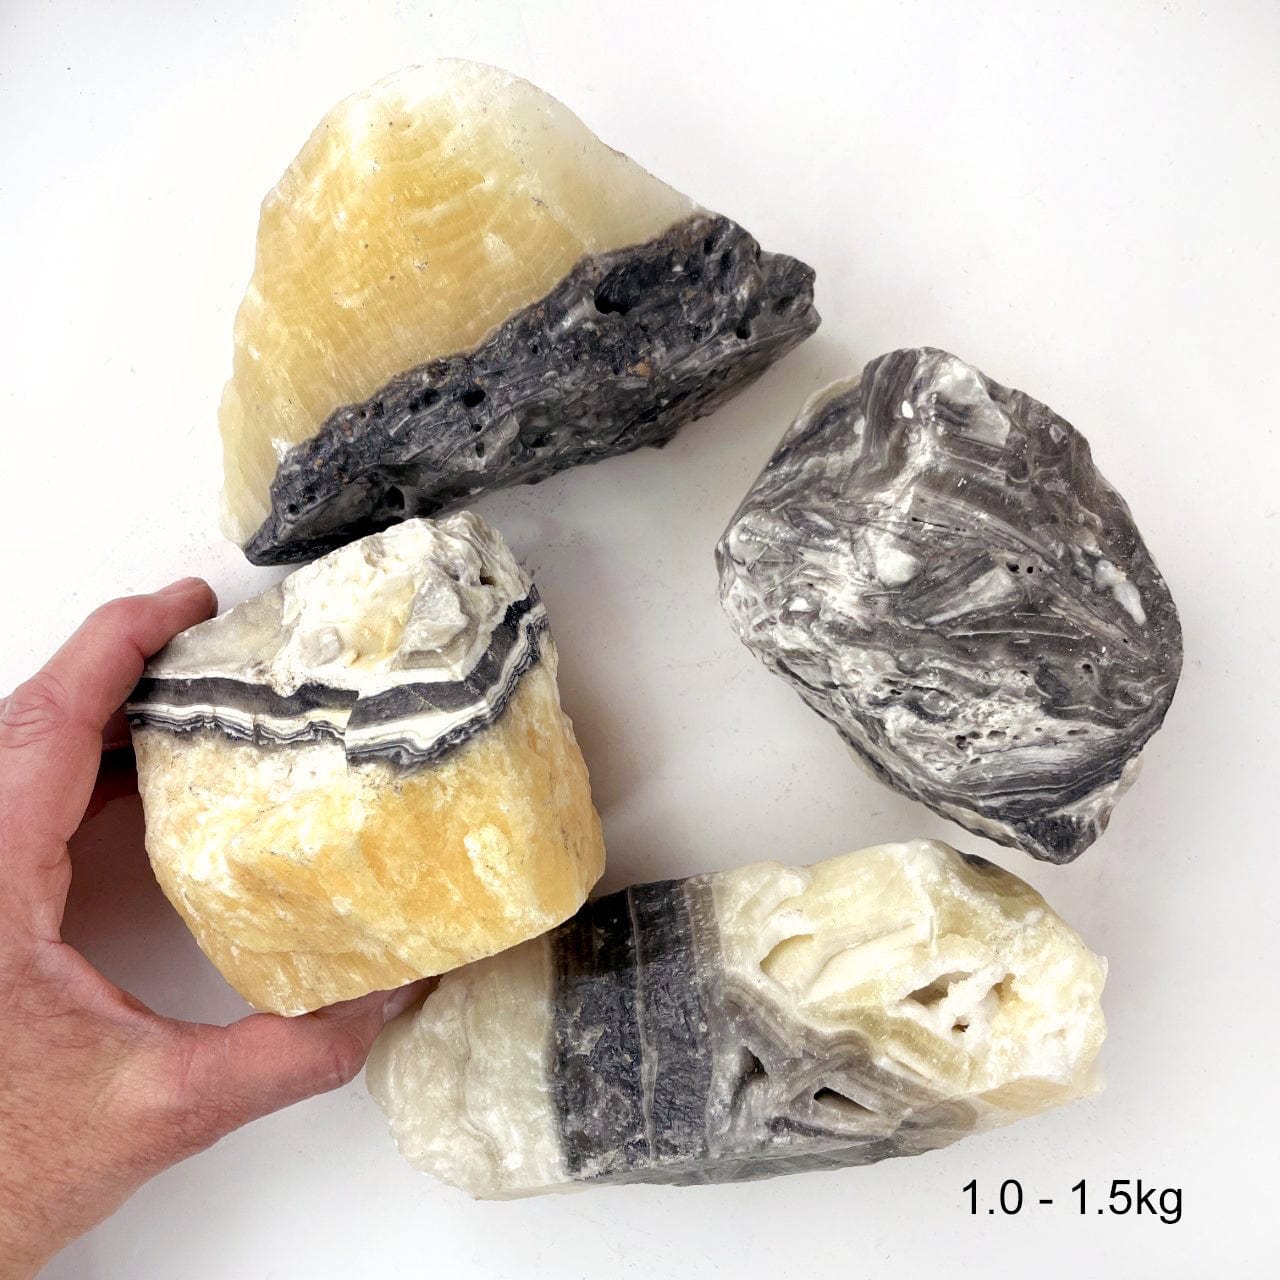 Mexican Onyx Rough Stone Chunks in the size 1.0-1.5 kilos, with one in a hand for size reference